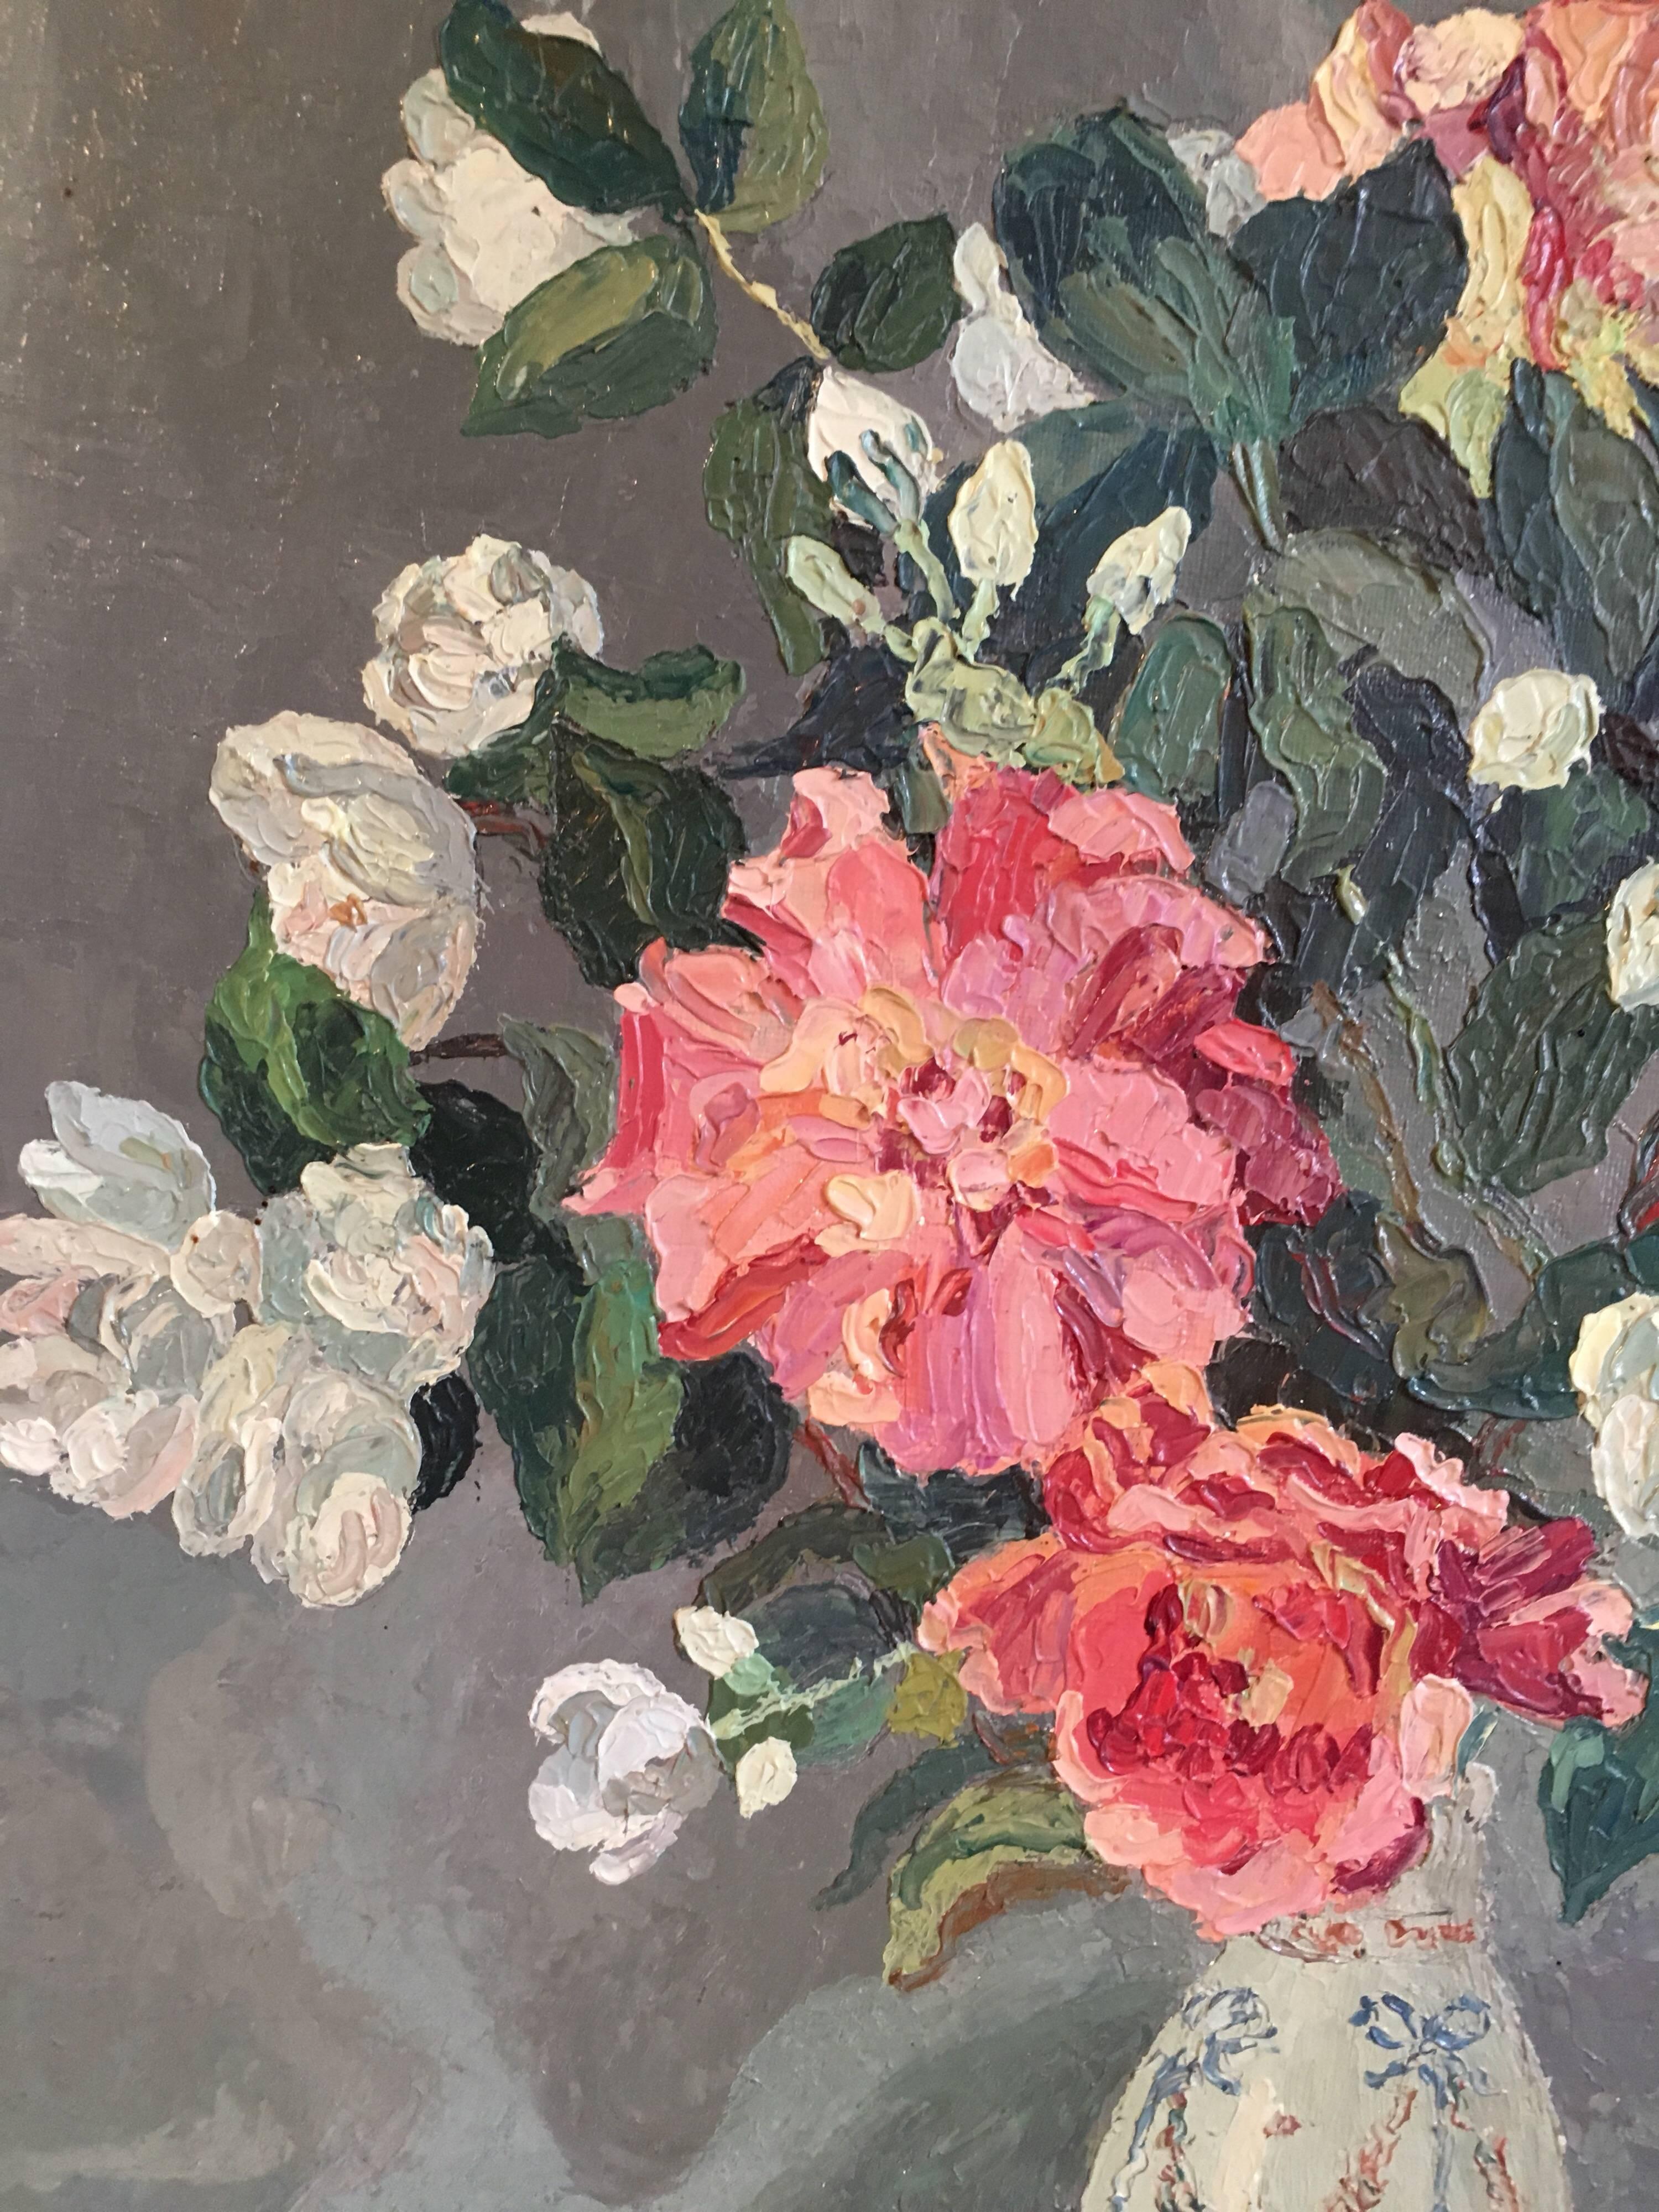 'Fleurs' French Bouquet, Floral Oil Painting, Signed 
By French artist 'M.Bader' , 20th Century
Signed by the artist on the lower left hand corner
Signed and titled verso
Oil painting on board, framed
Framed size: 22 x 18.5 inches

Beautifully